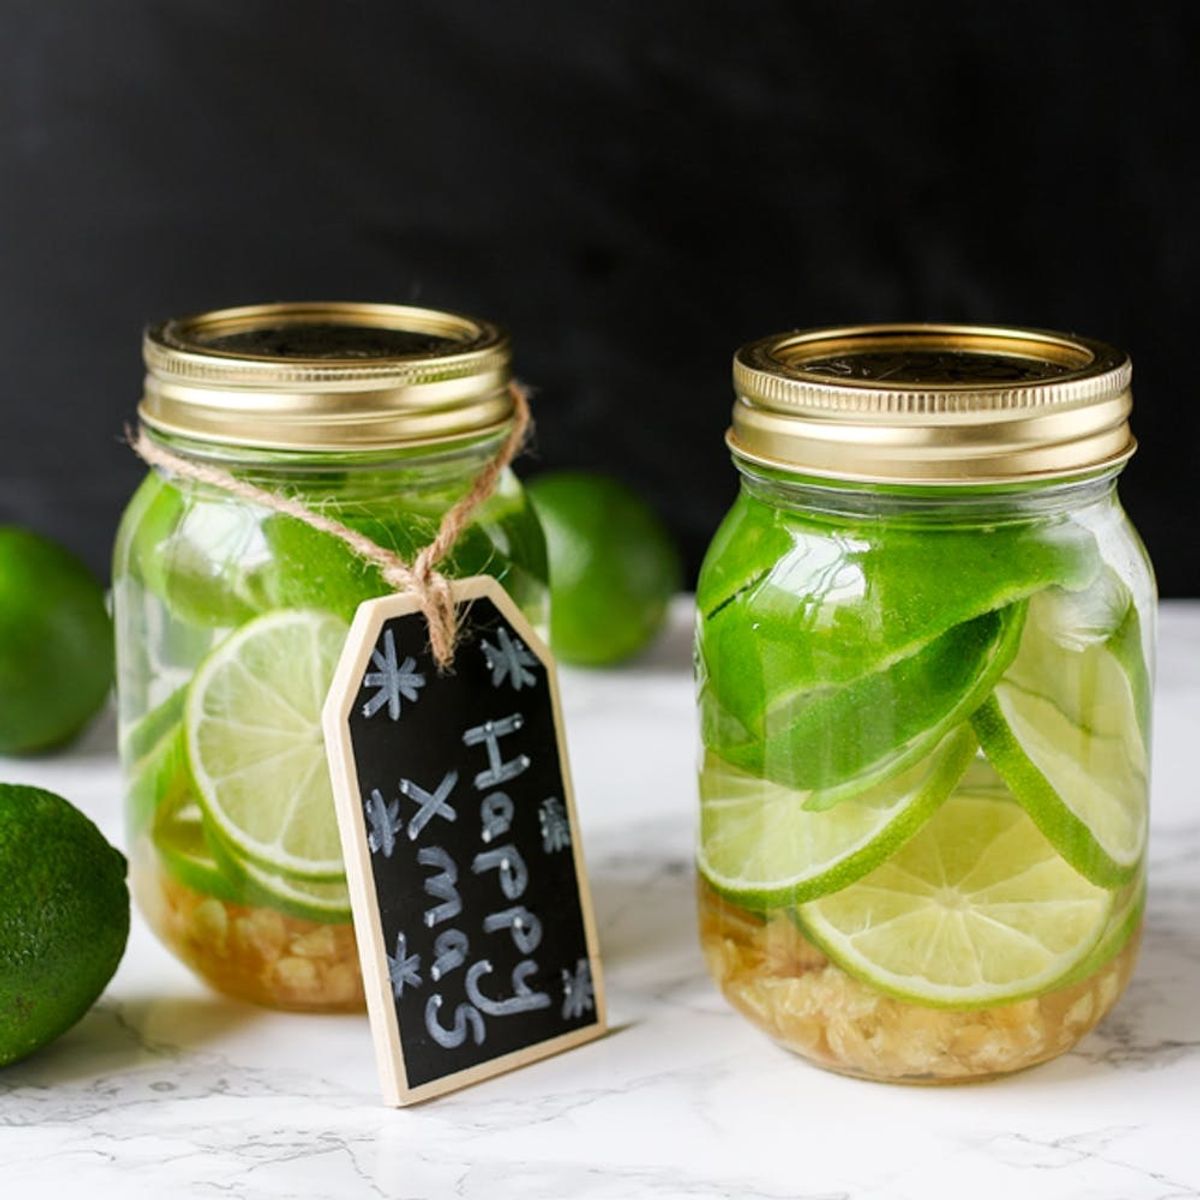 How to Make Ginger-Lime-Infused Vodka in 5 Minutes